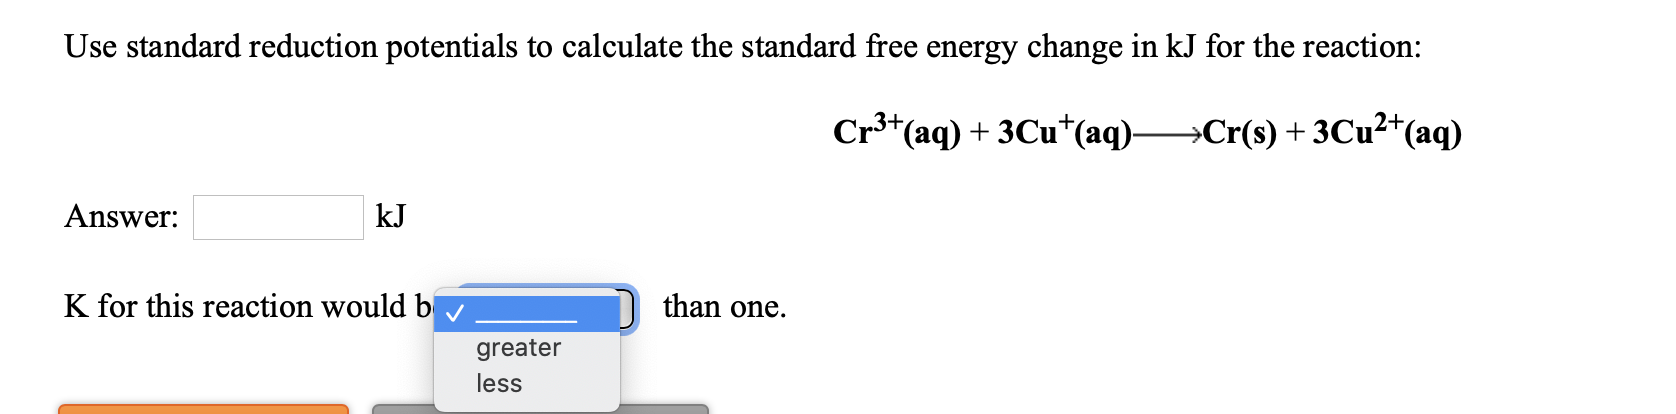 Use standard reduction potentials to calculate the standard free energy change in kJ for the reaction:
Cr3+(aq) + 3Cu*(aq)-
→Cr(s) + 3Cu²+(aq)
Answer:
kJ
than one.
K for this reaction would bv
greater
less
